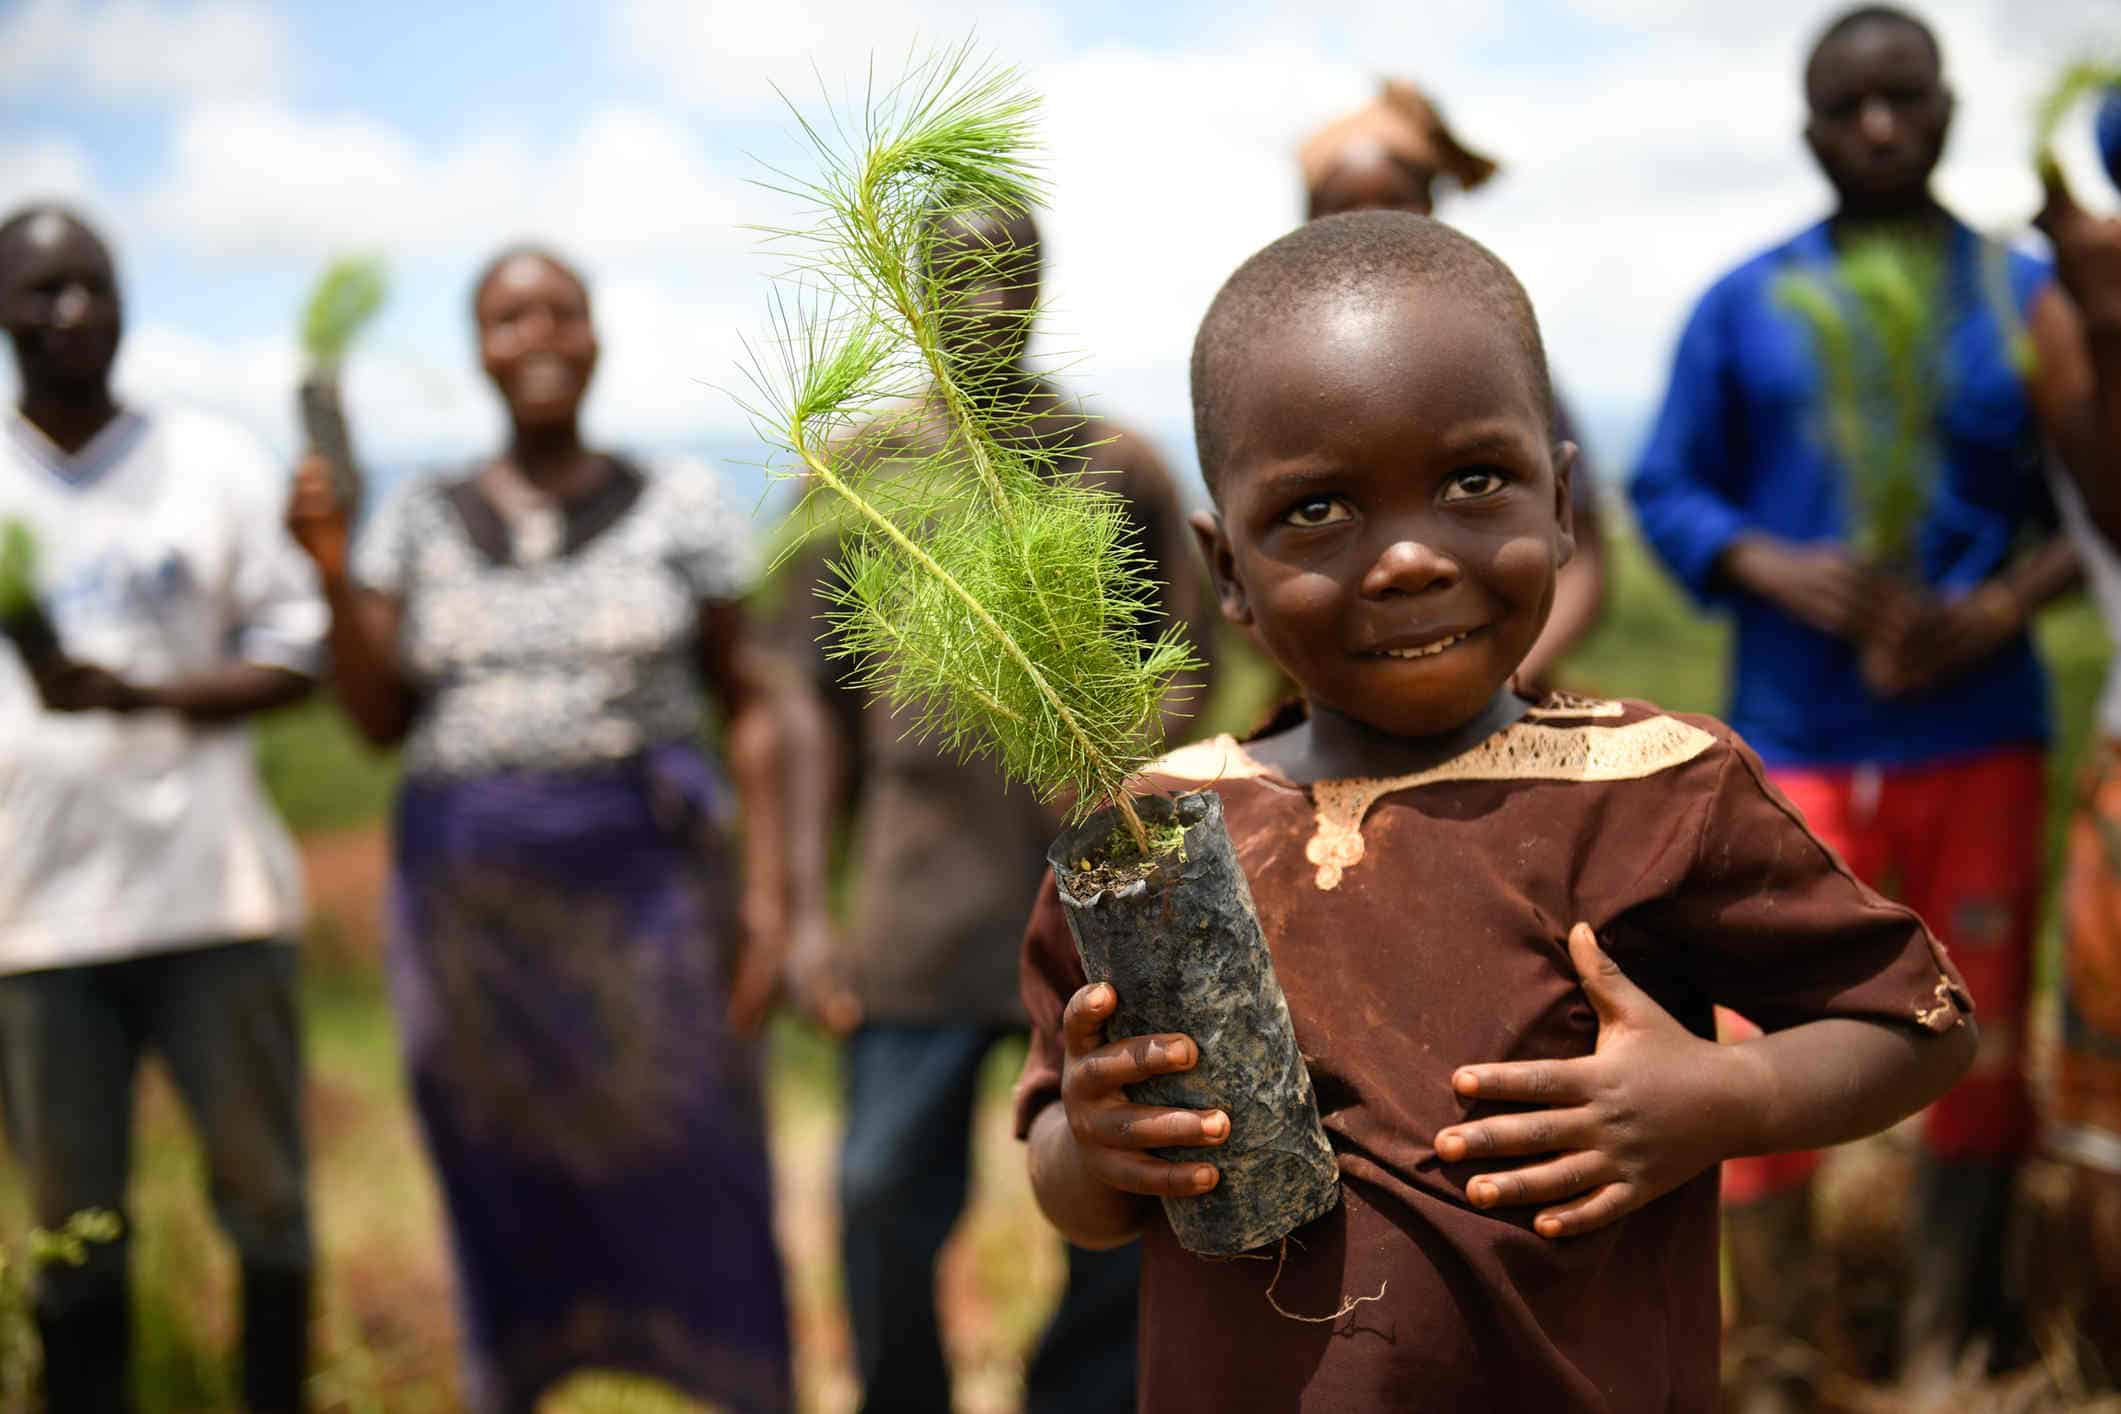 A young black boy holds a pine tree seedling